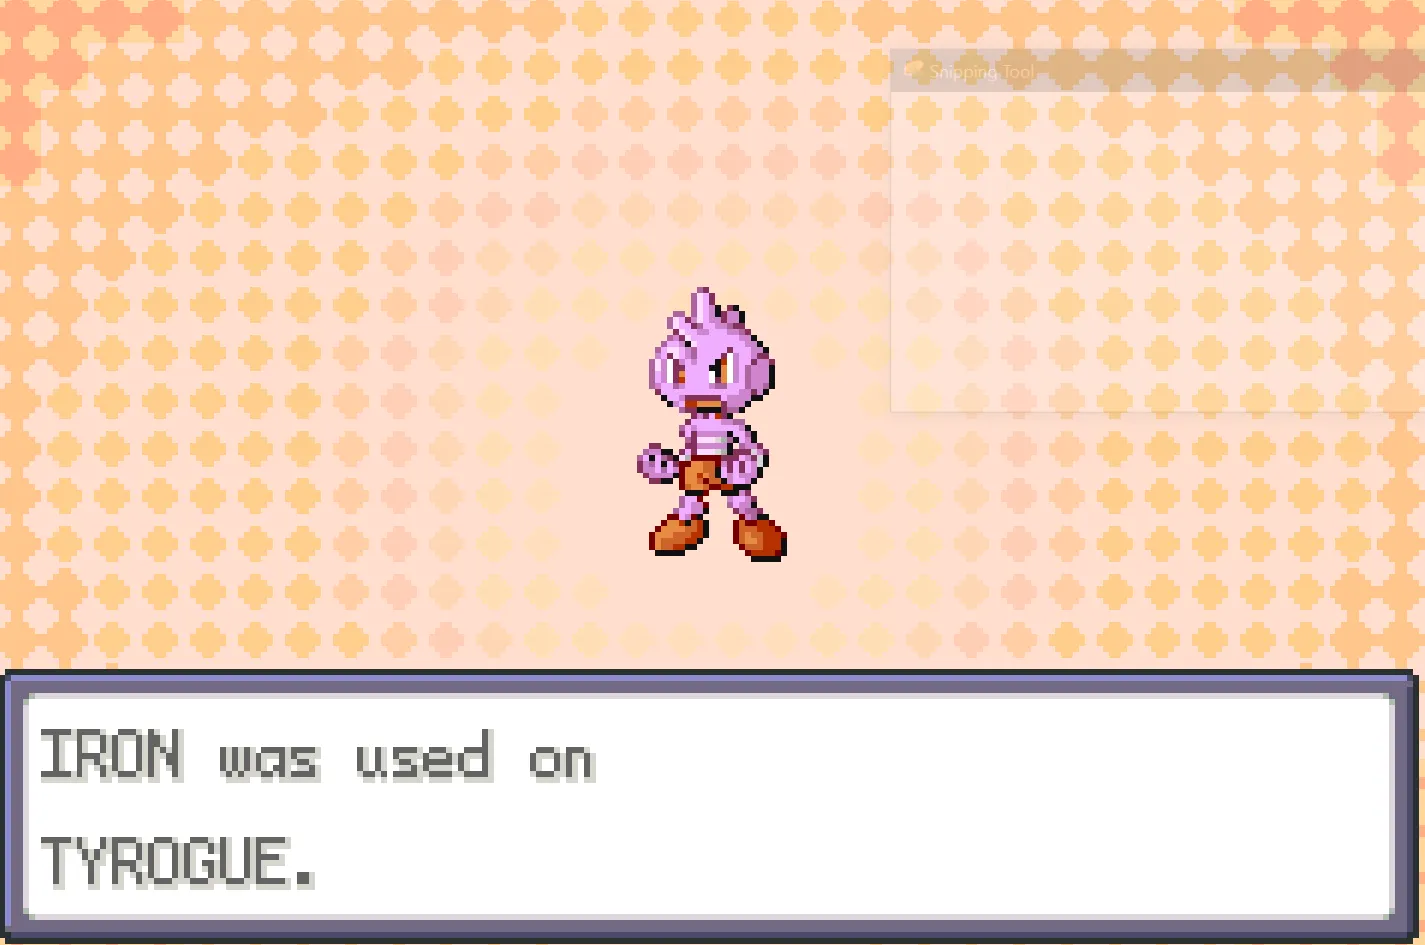 How to get Hitmonlee and Hitmonchan in Pokemon FireRed and